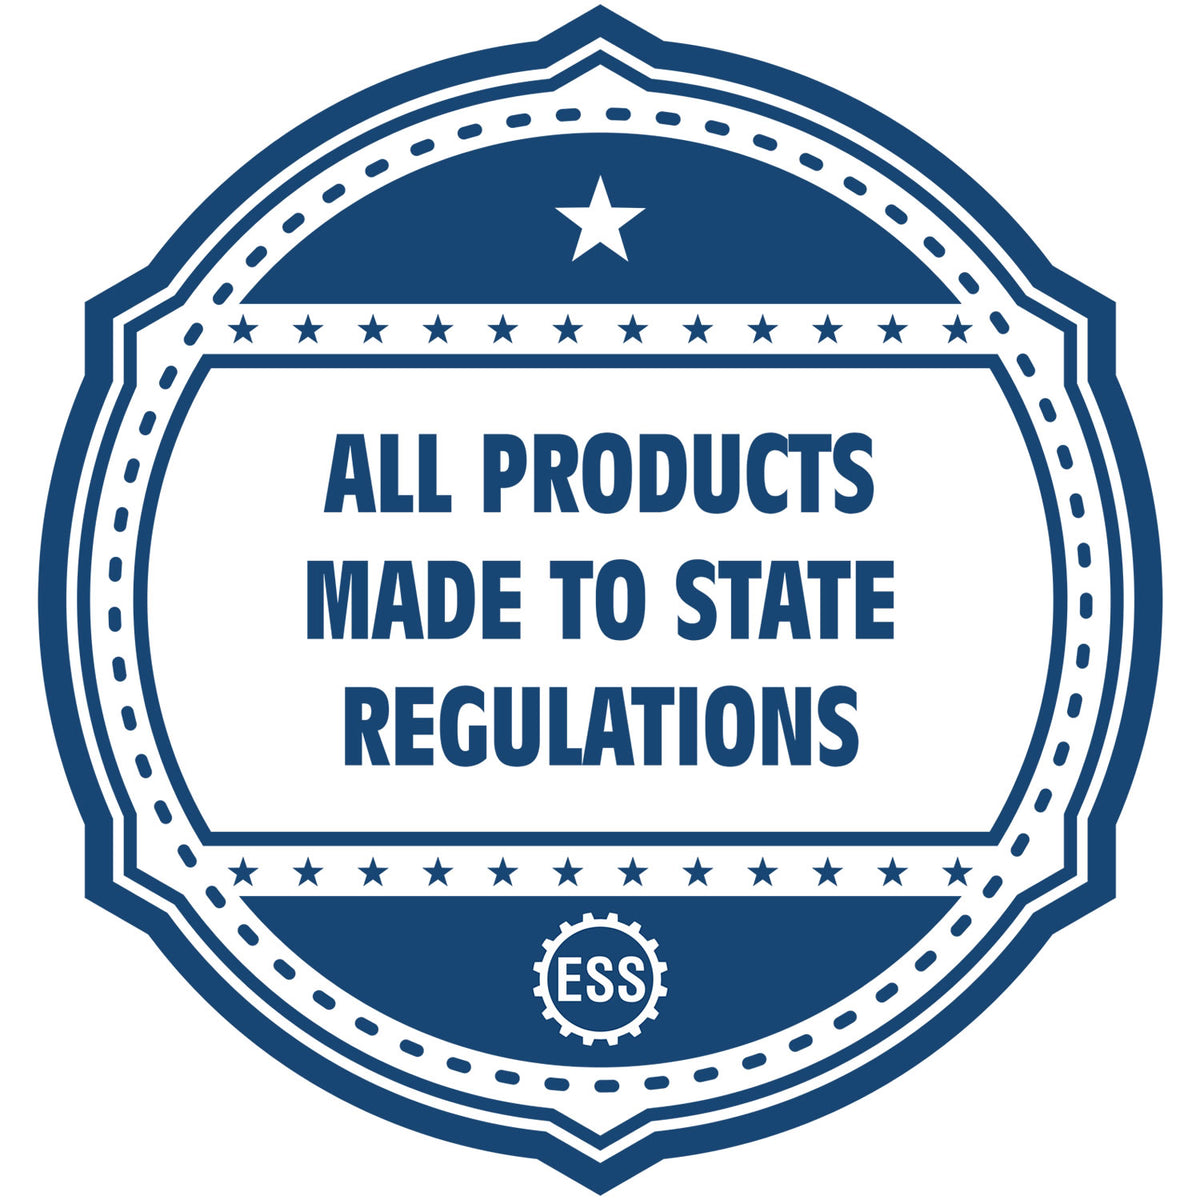 An icon or badge element for the Slim Pre-Inked North Carolina Professional Engineer Seal Stamp showing that this product is made in compliance with state regulations.